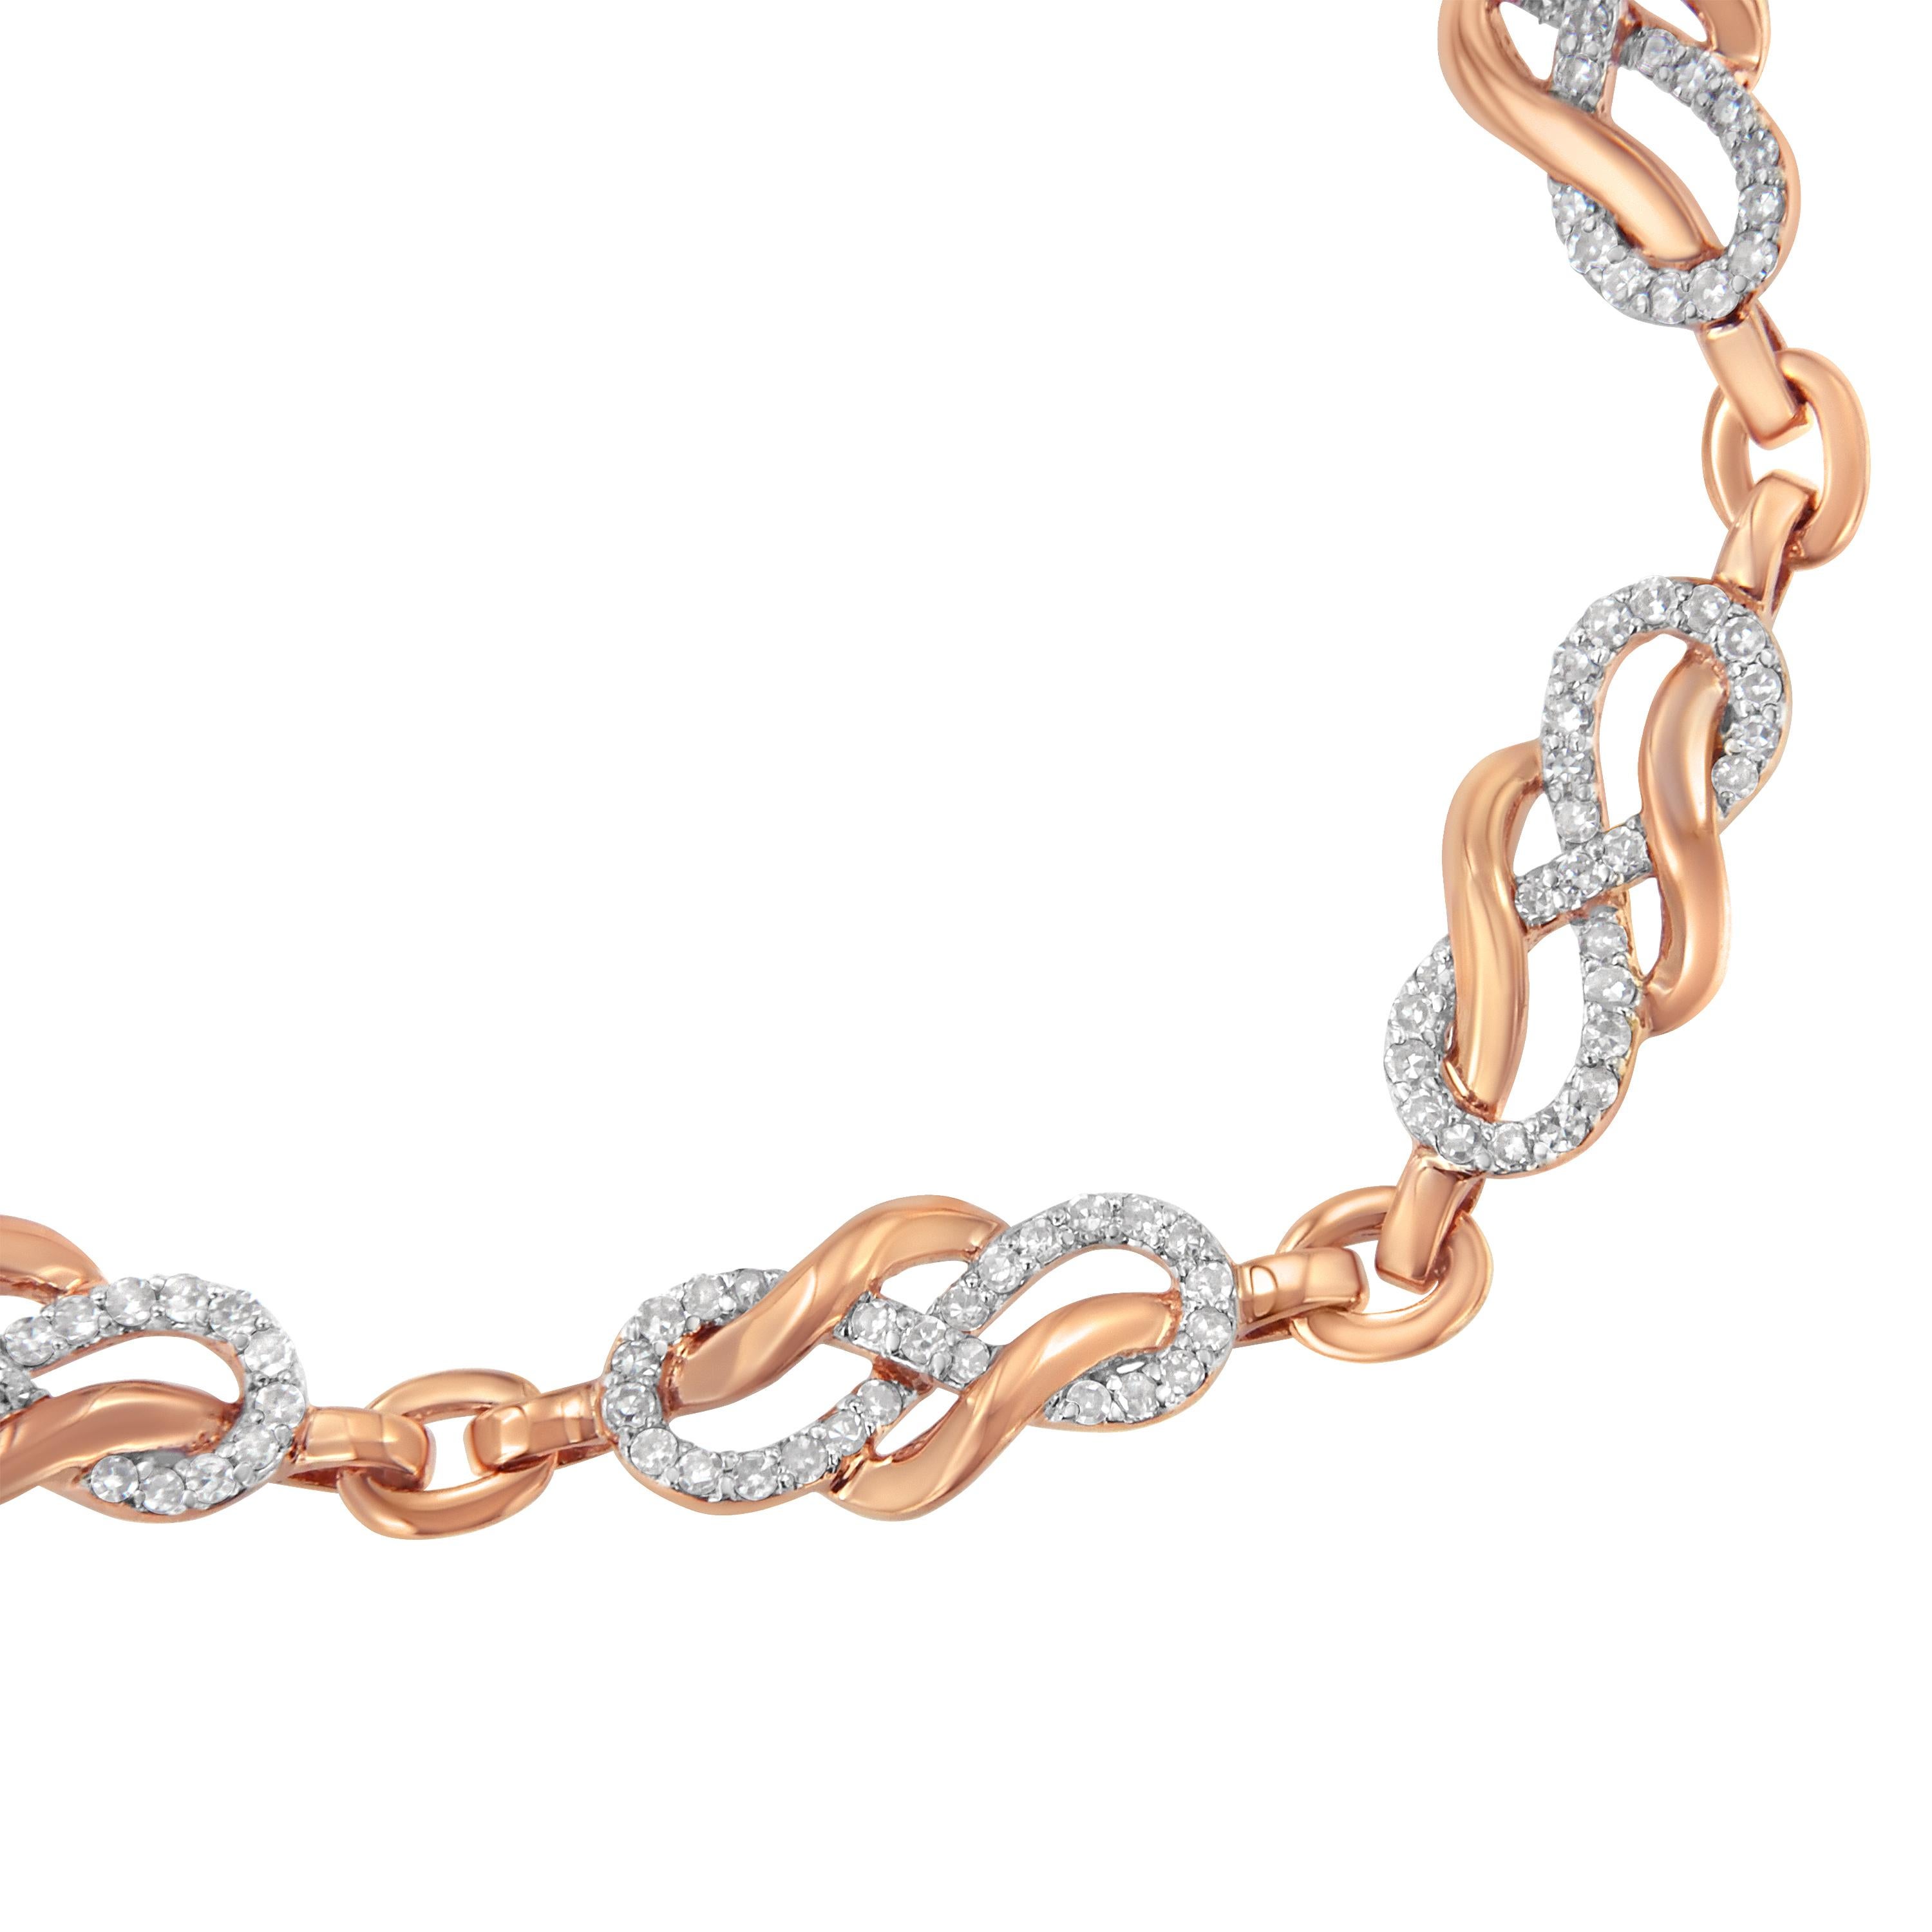 This striking piece is made for those who’re all for making a statement. The bracelet’s main charm lies in the infinity loop and swirl link design that comes in a juxtaposition of hues. The 10K rose gold chain is contrasted with 200 natural diamonds